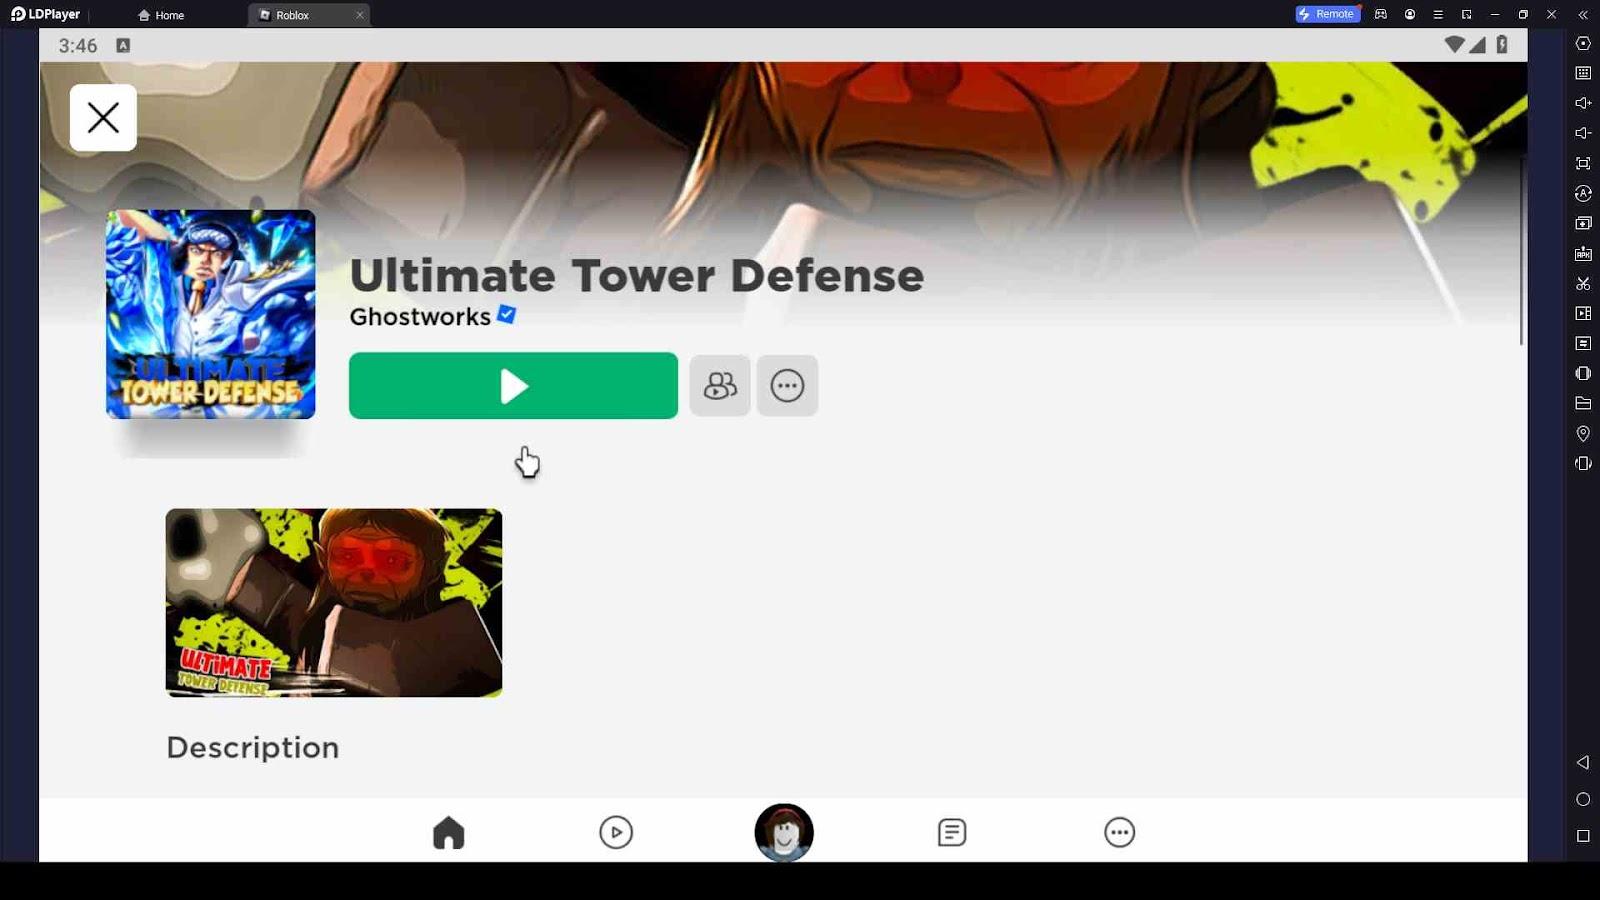 Roblox Ultimate Tower Defense Codes